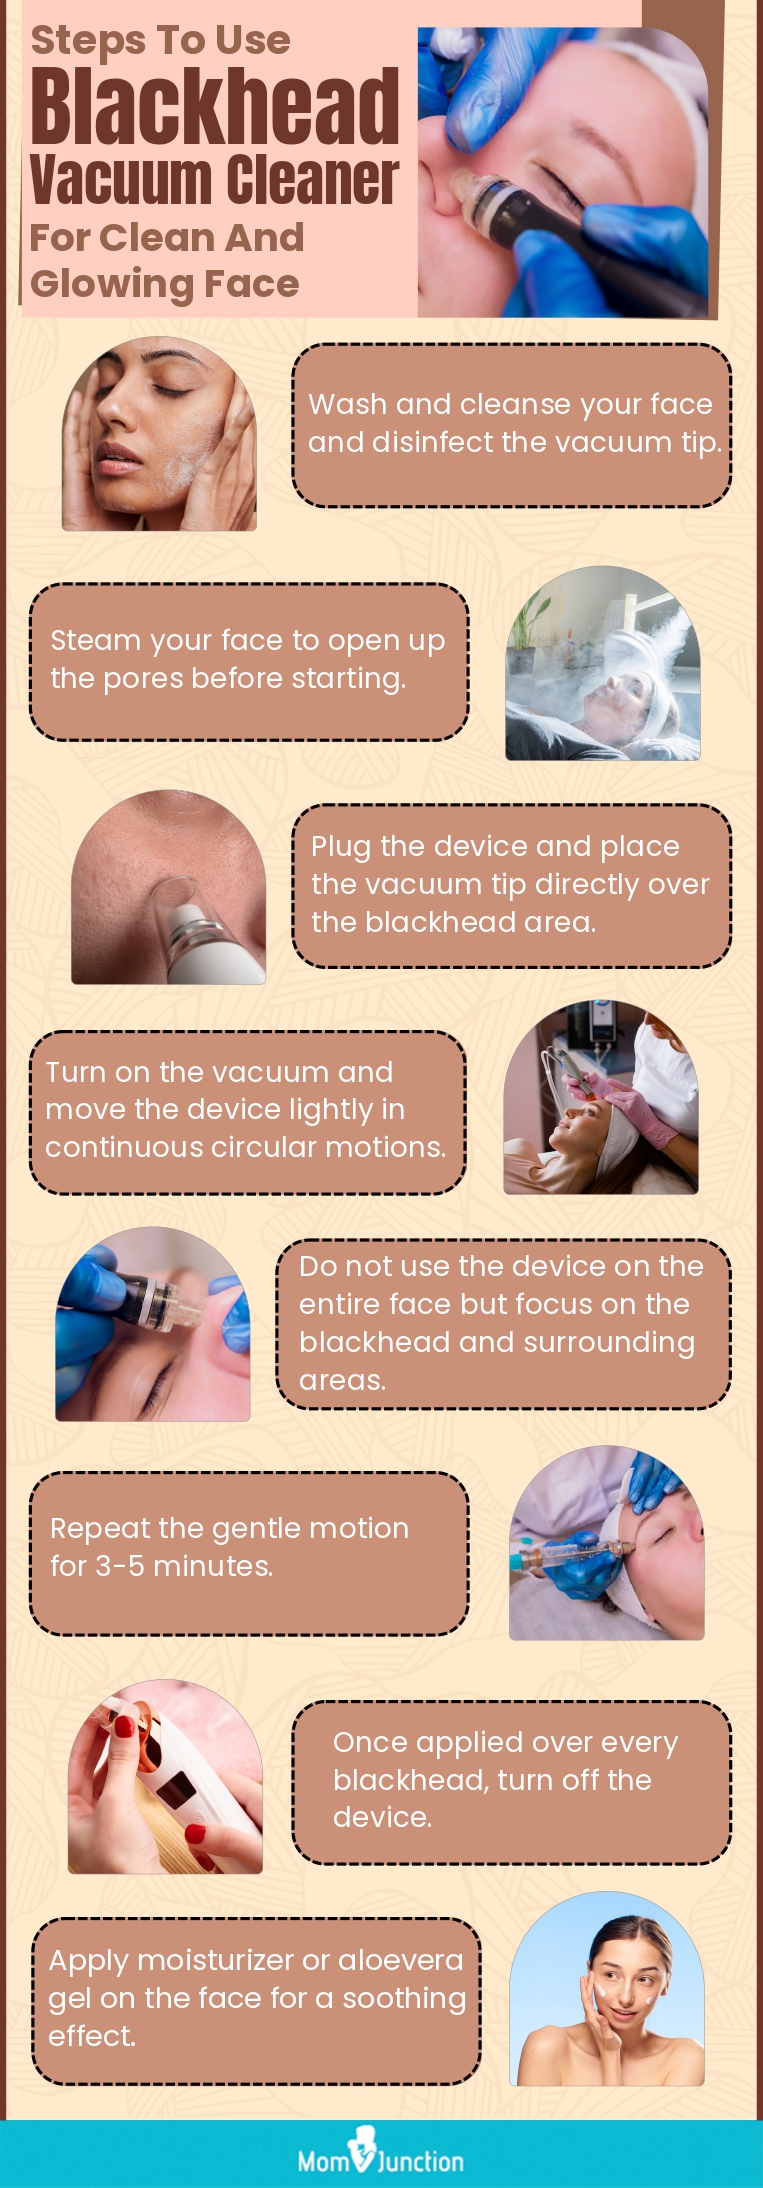 Steps To Use Blackhead Vacuum Cleaner For Clean And Glowing Face (infographic)